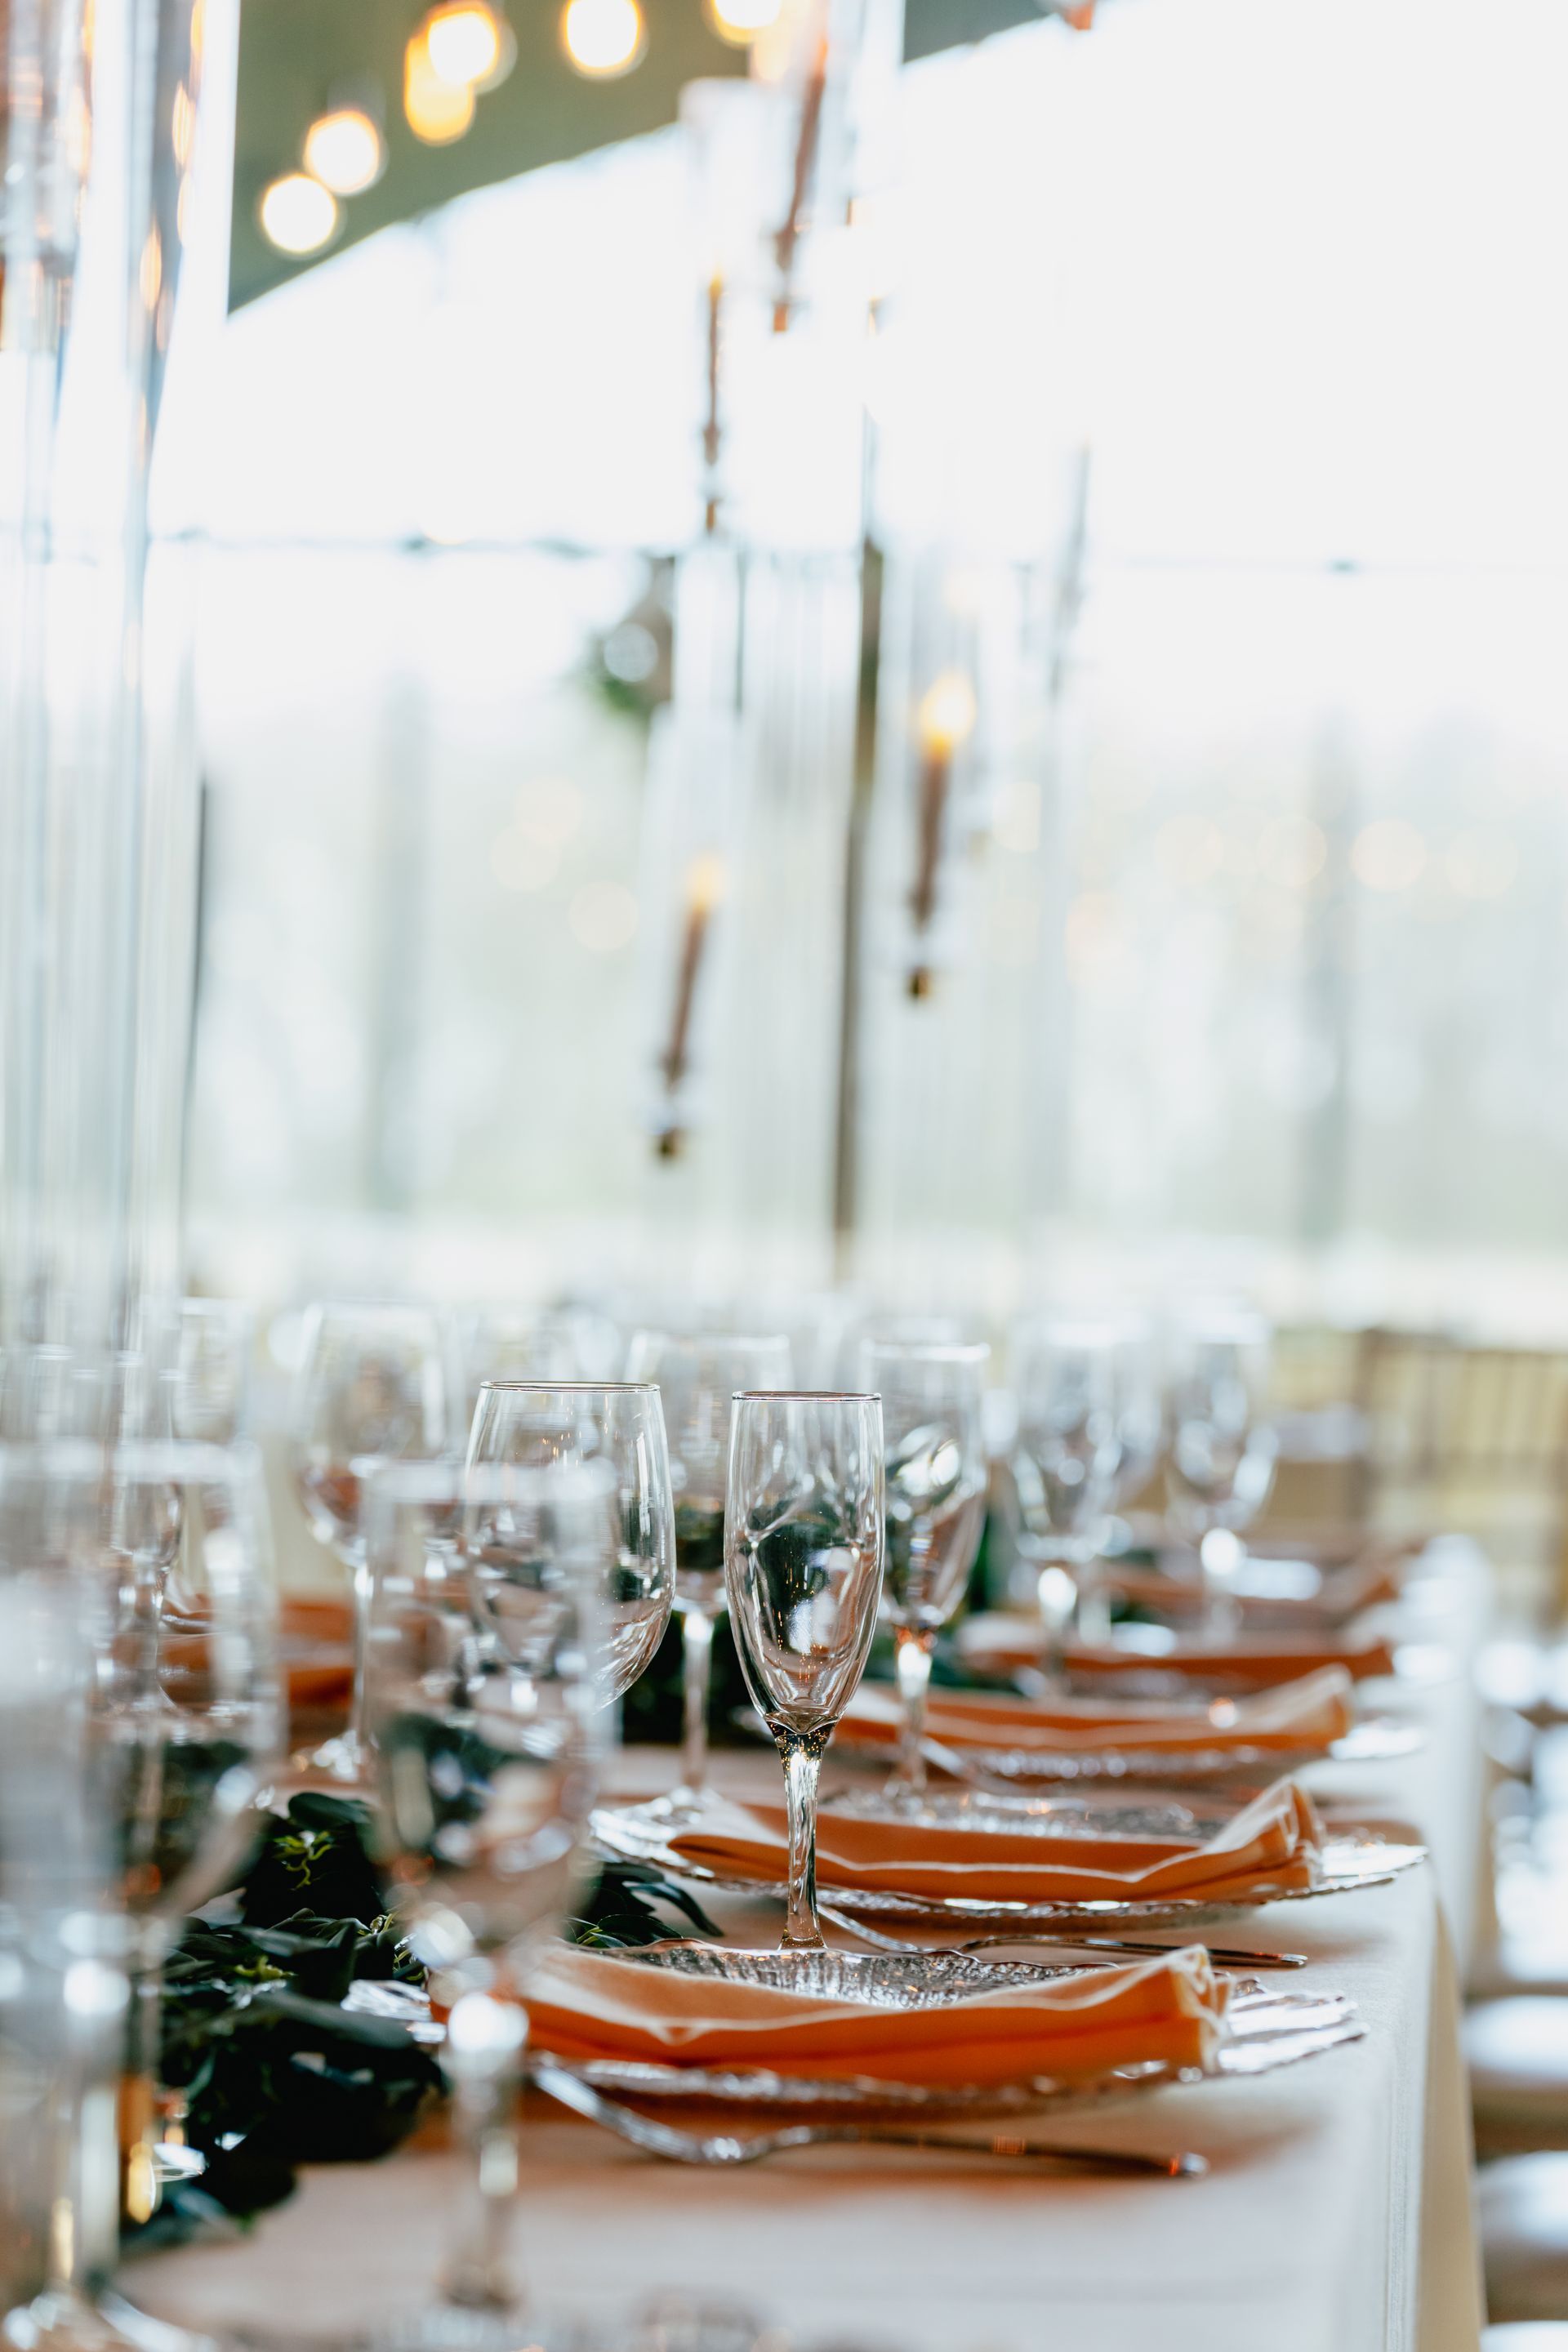 A long table with plates , glasses , napkins and candles on it.